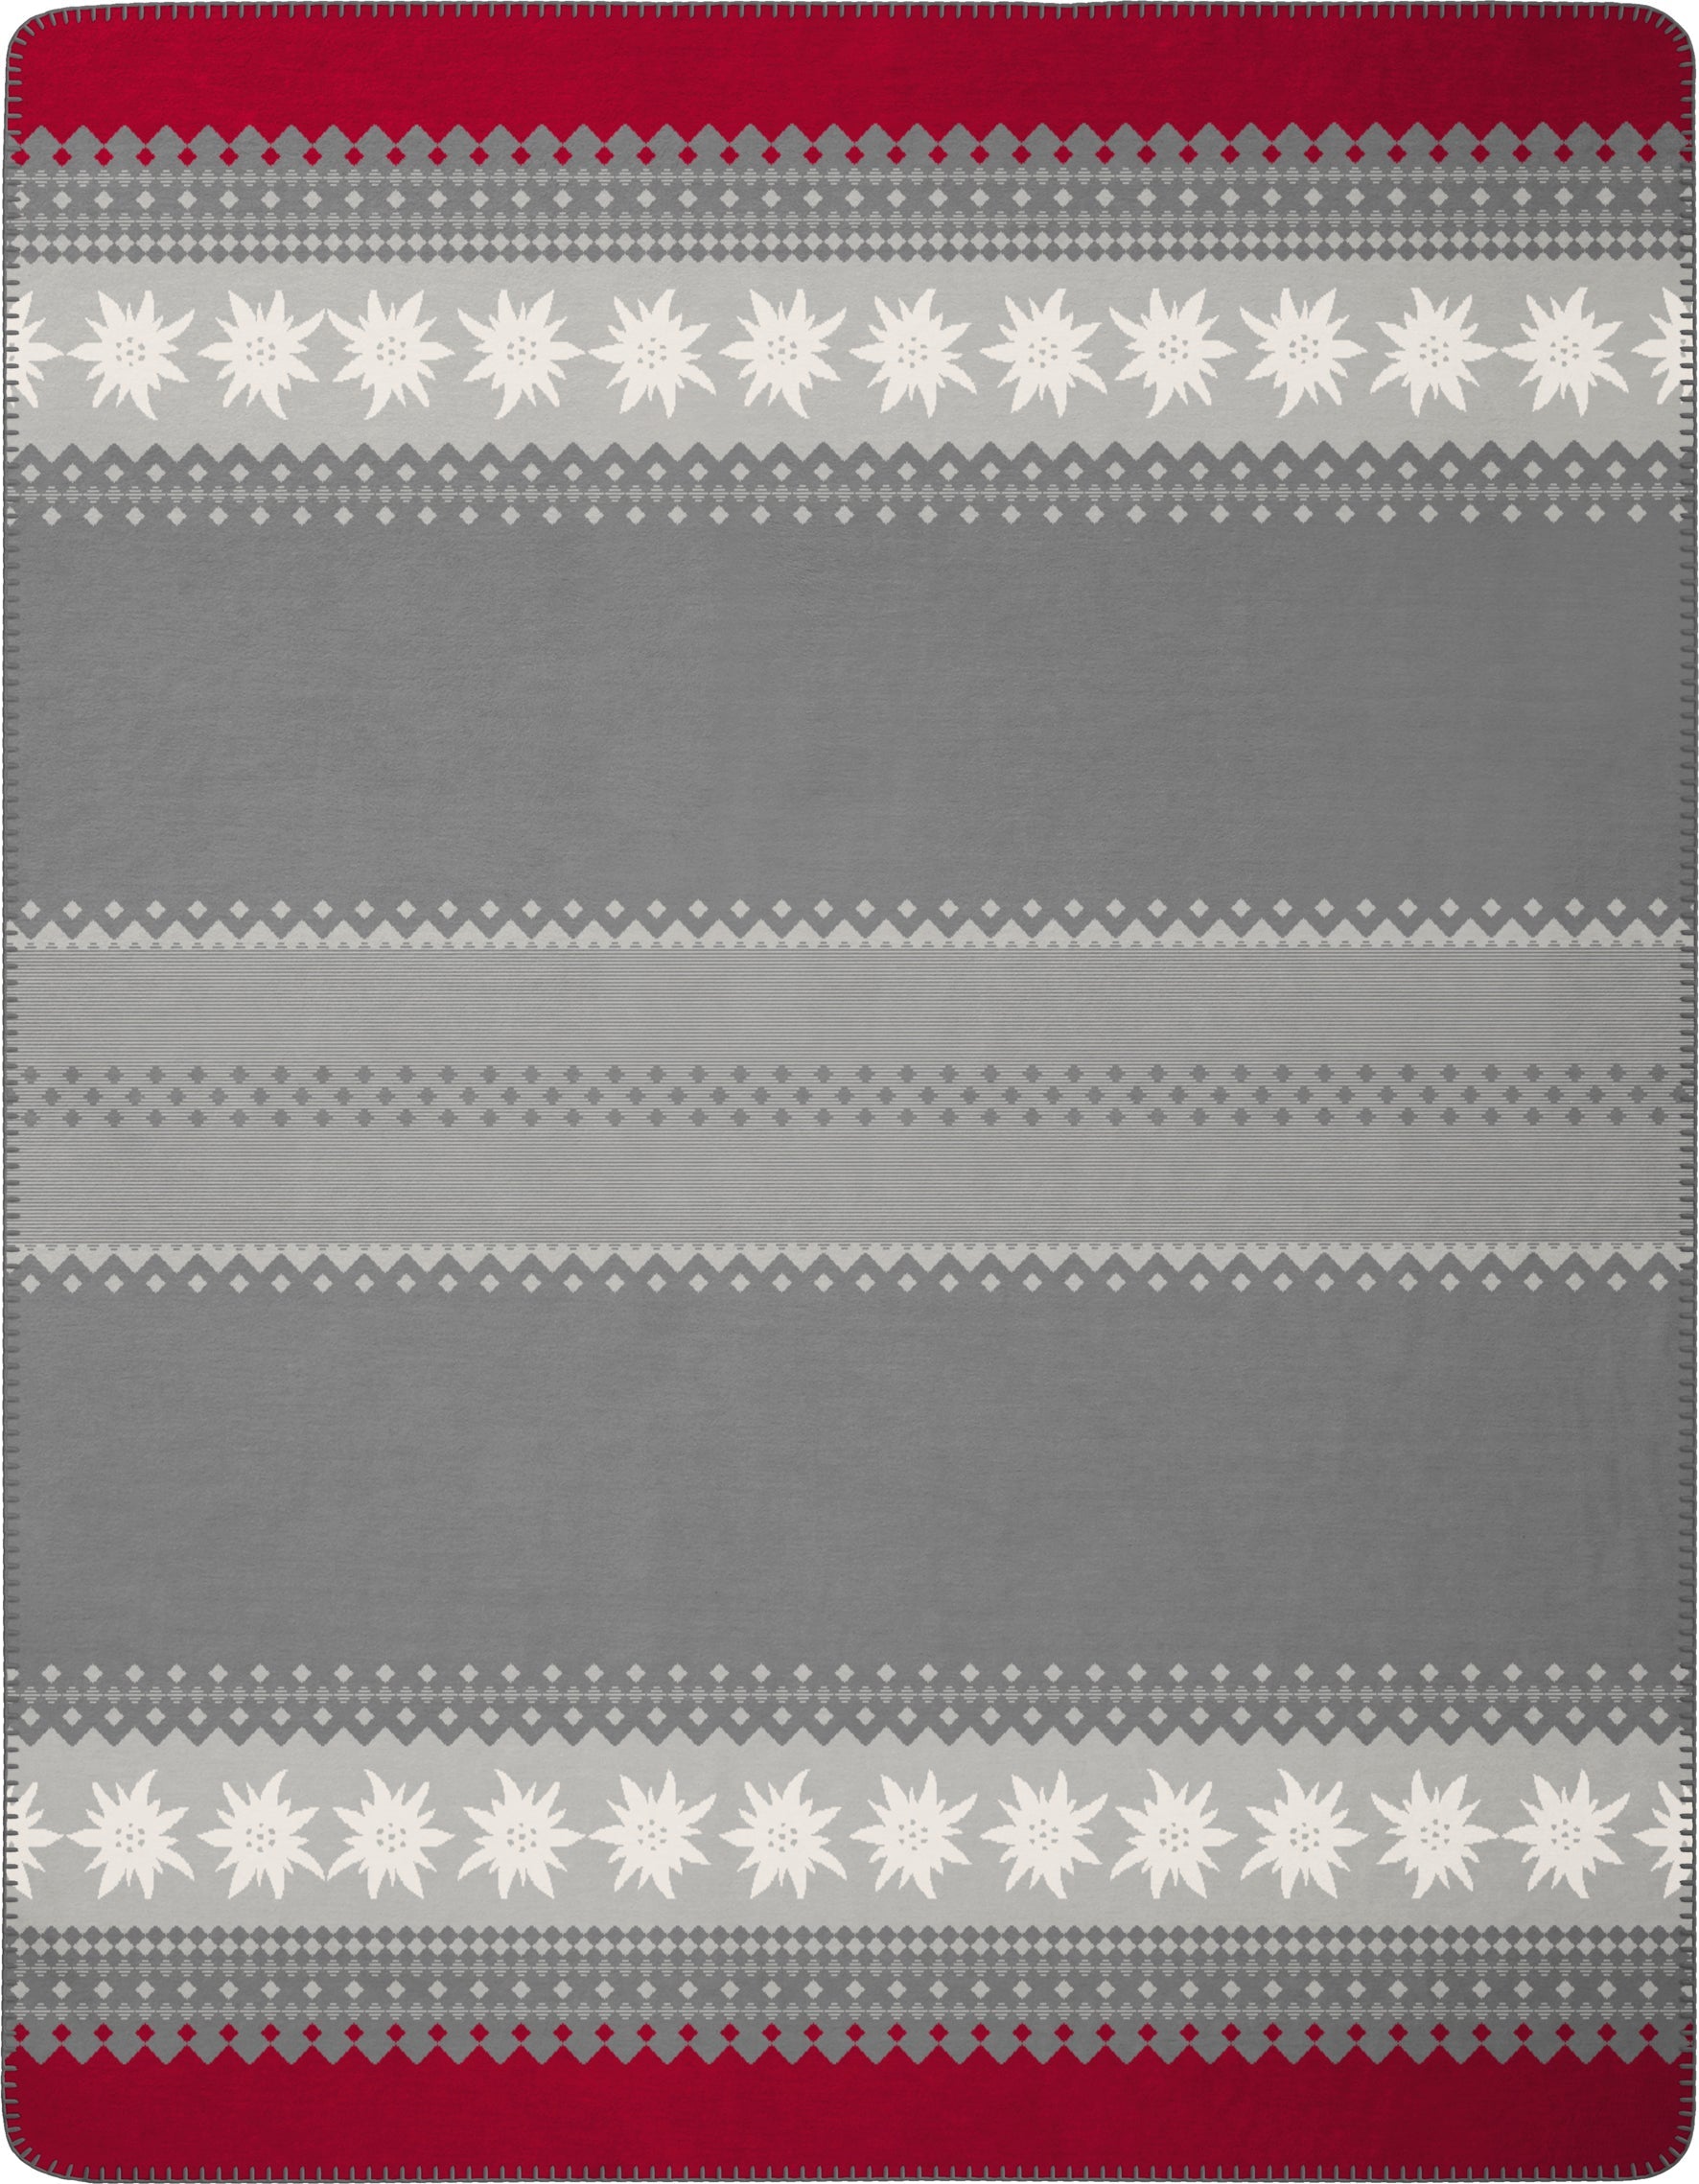 Edelweiss Blanket. Red boarder on a background of shades of grey, with floral and geometric pattern across the blanket